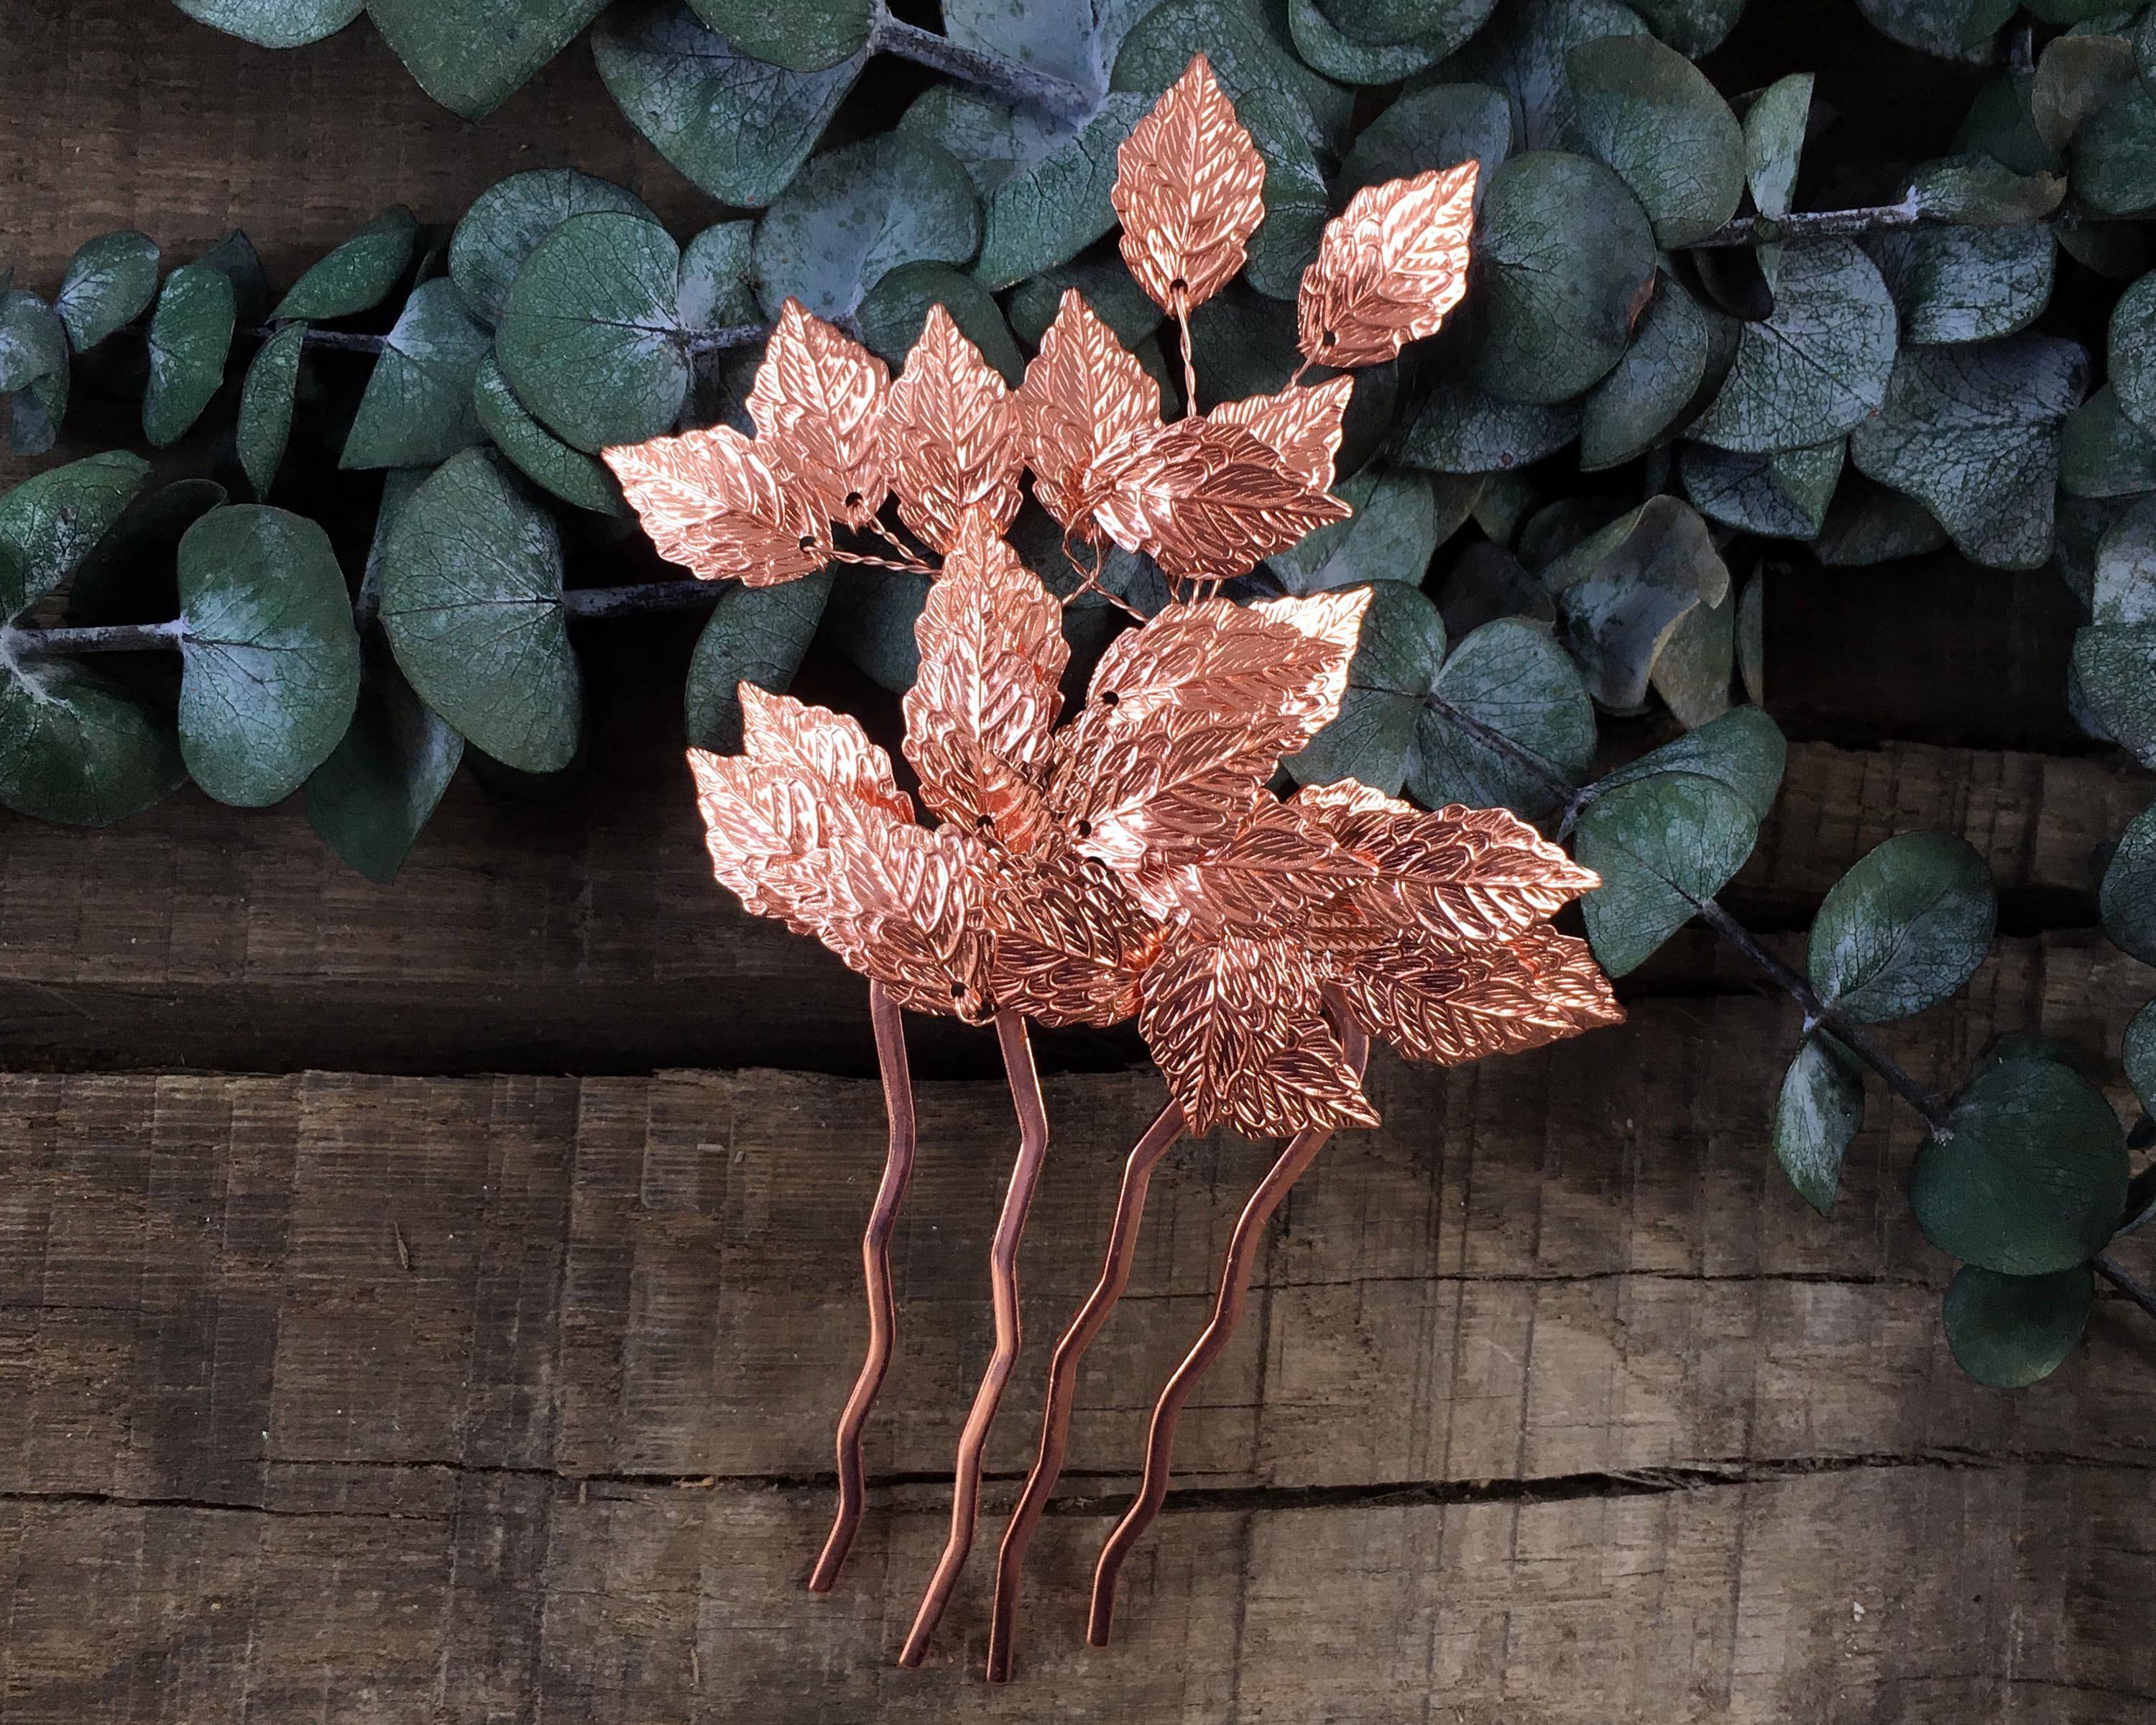 HAIR COMB - BRIDAL JEWELLERY WITH LEAFS IN ROSÉ GOLD © Seegang Berlin